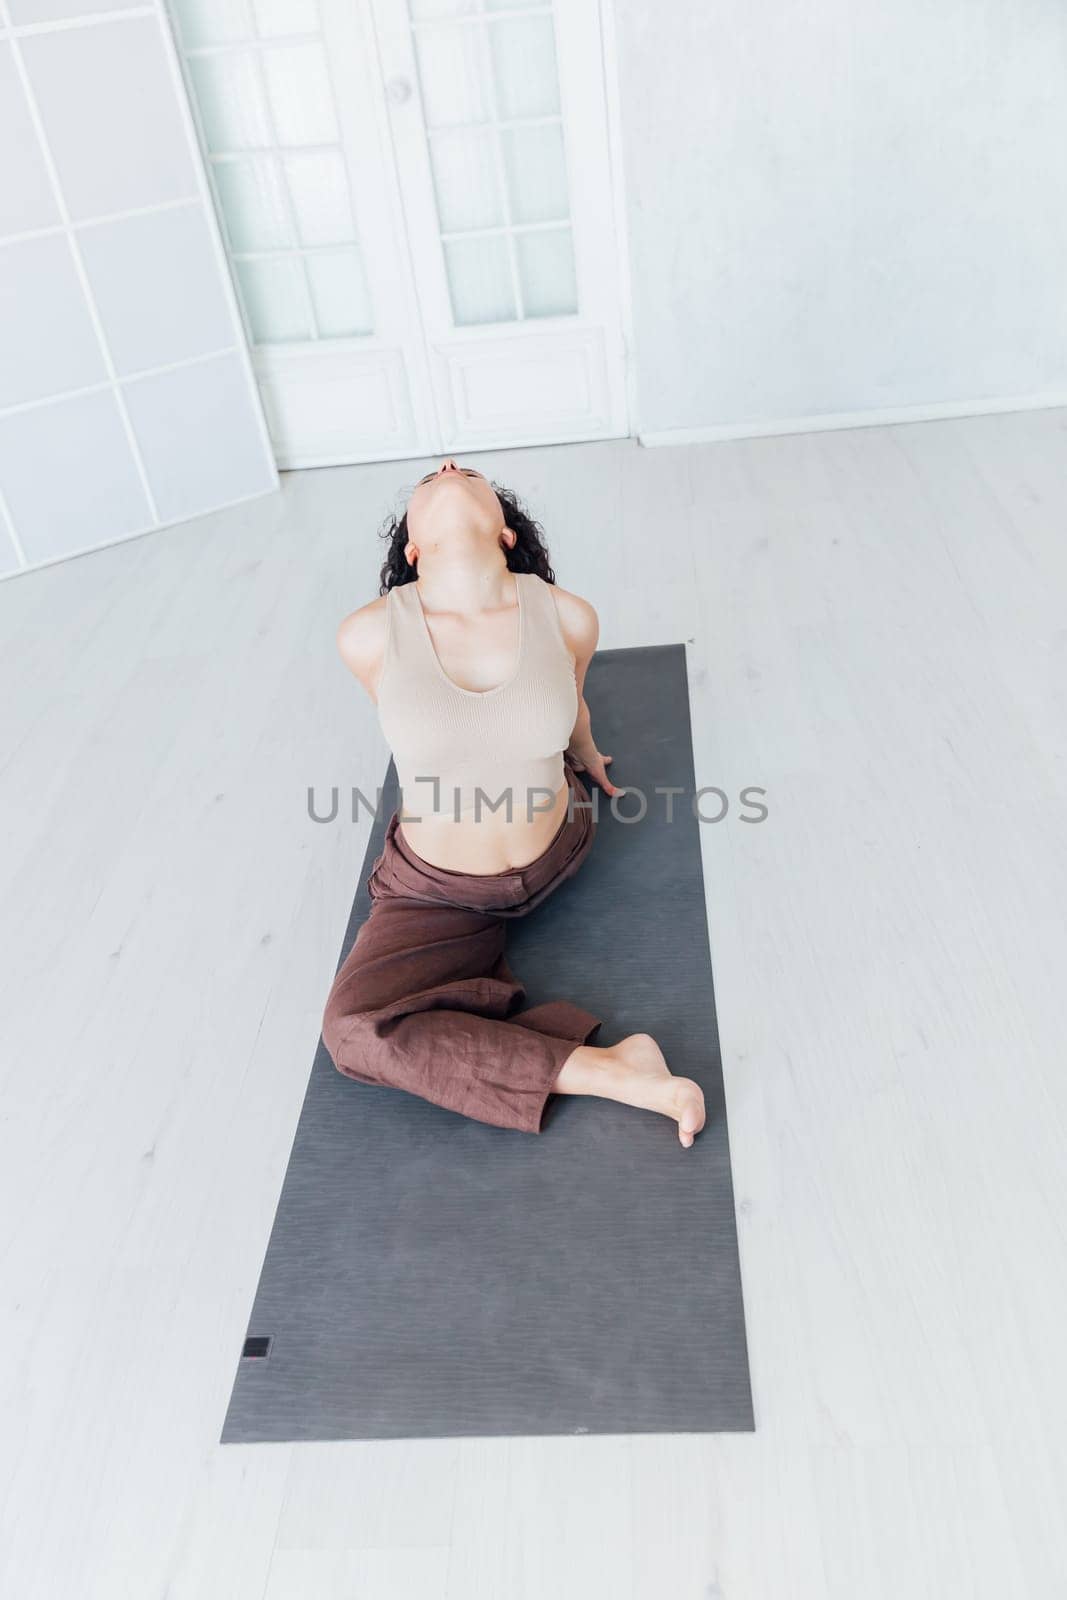 Stay at home fitness. Strong mature woman doing half bridge yoga pose, strengthening her abs muscles indoors, copy space. Fit senior woman working out in living room during covid isolation